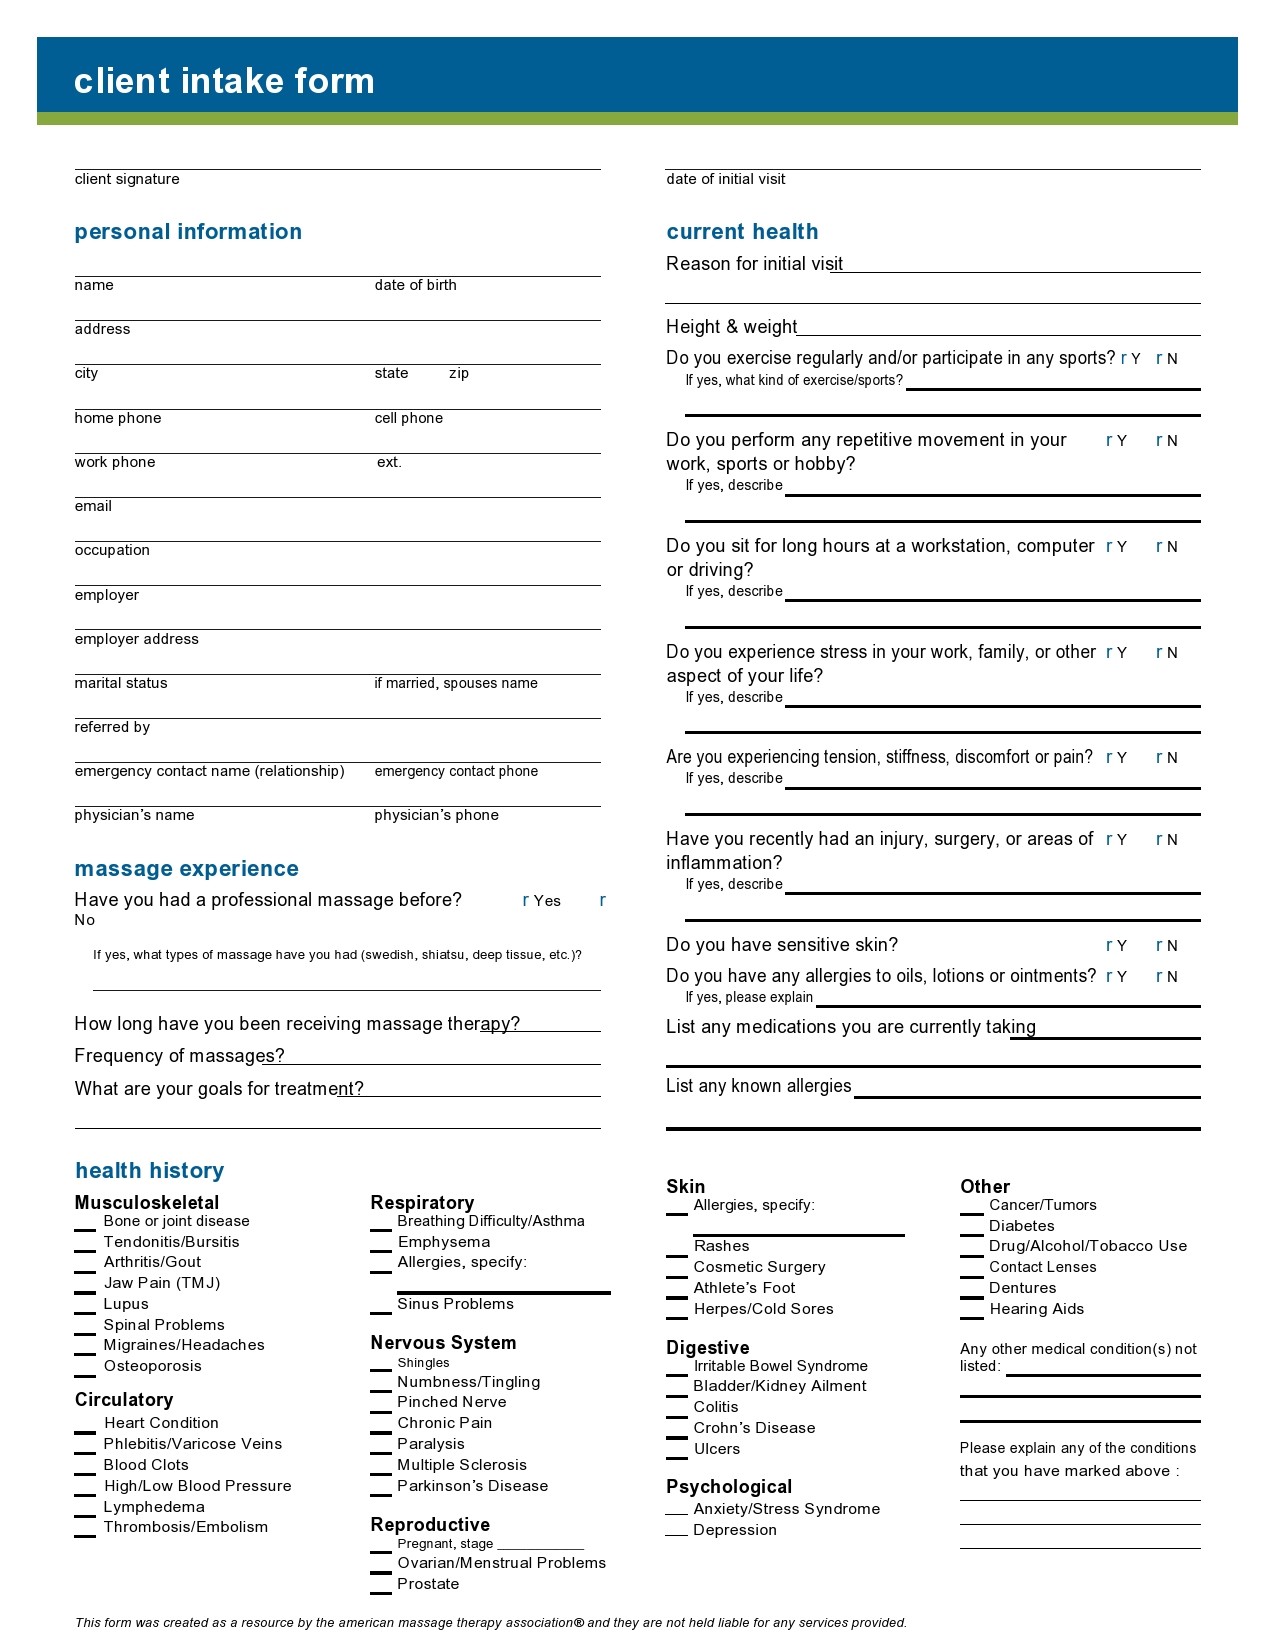 Free client intake form 39